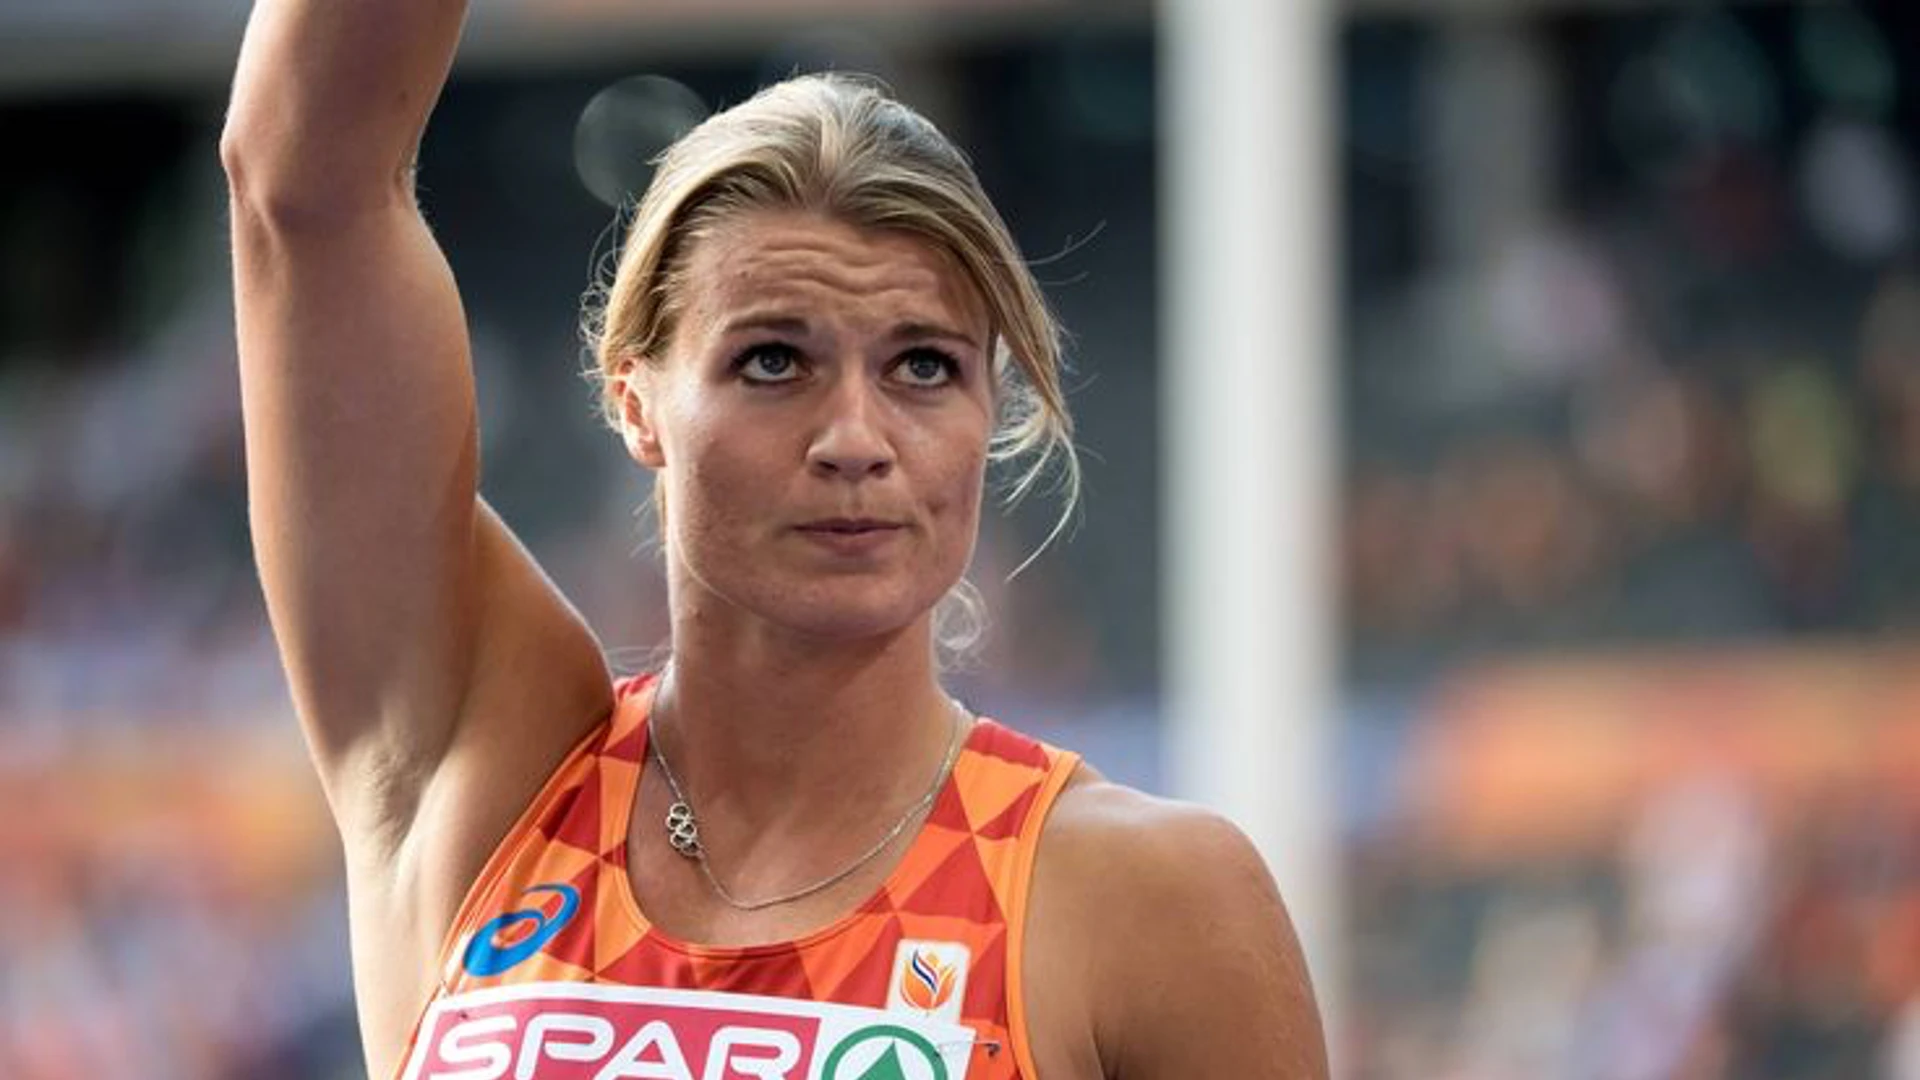 Dafne Schippers retires from track and field